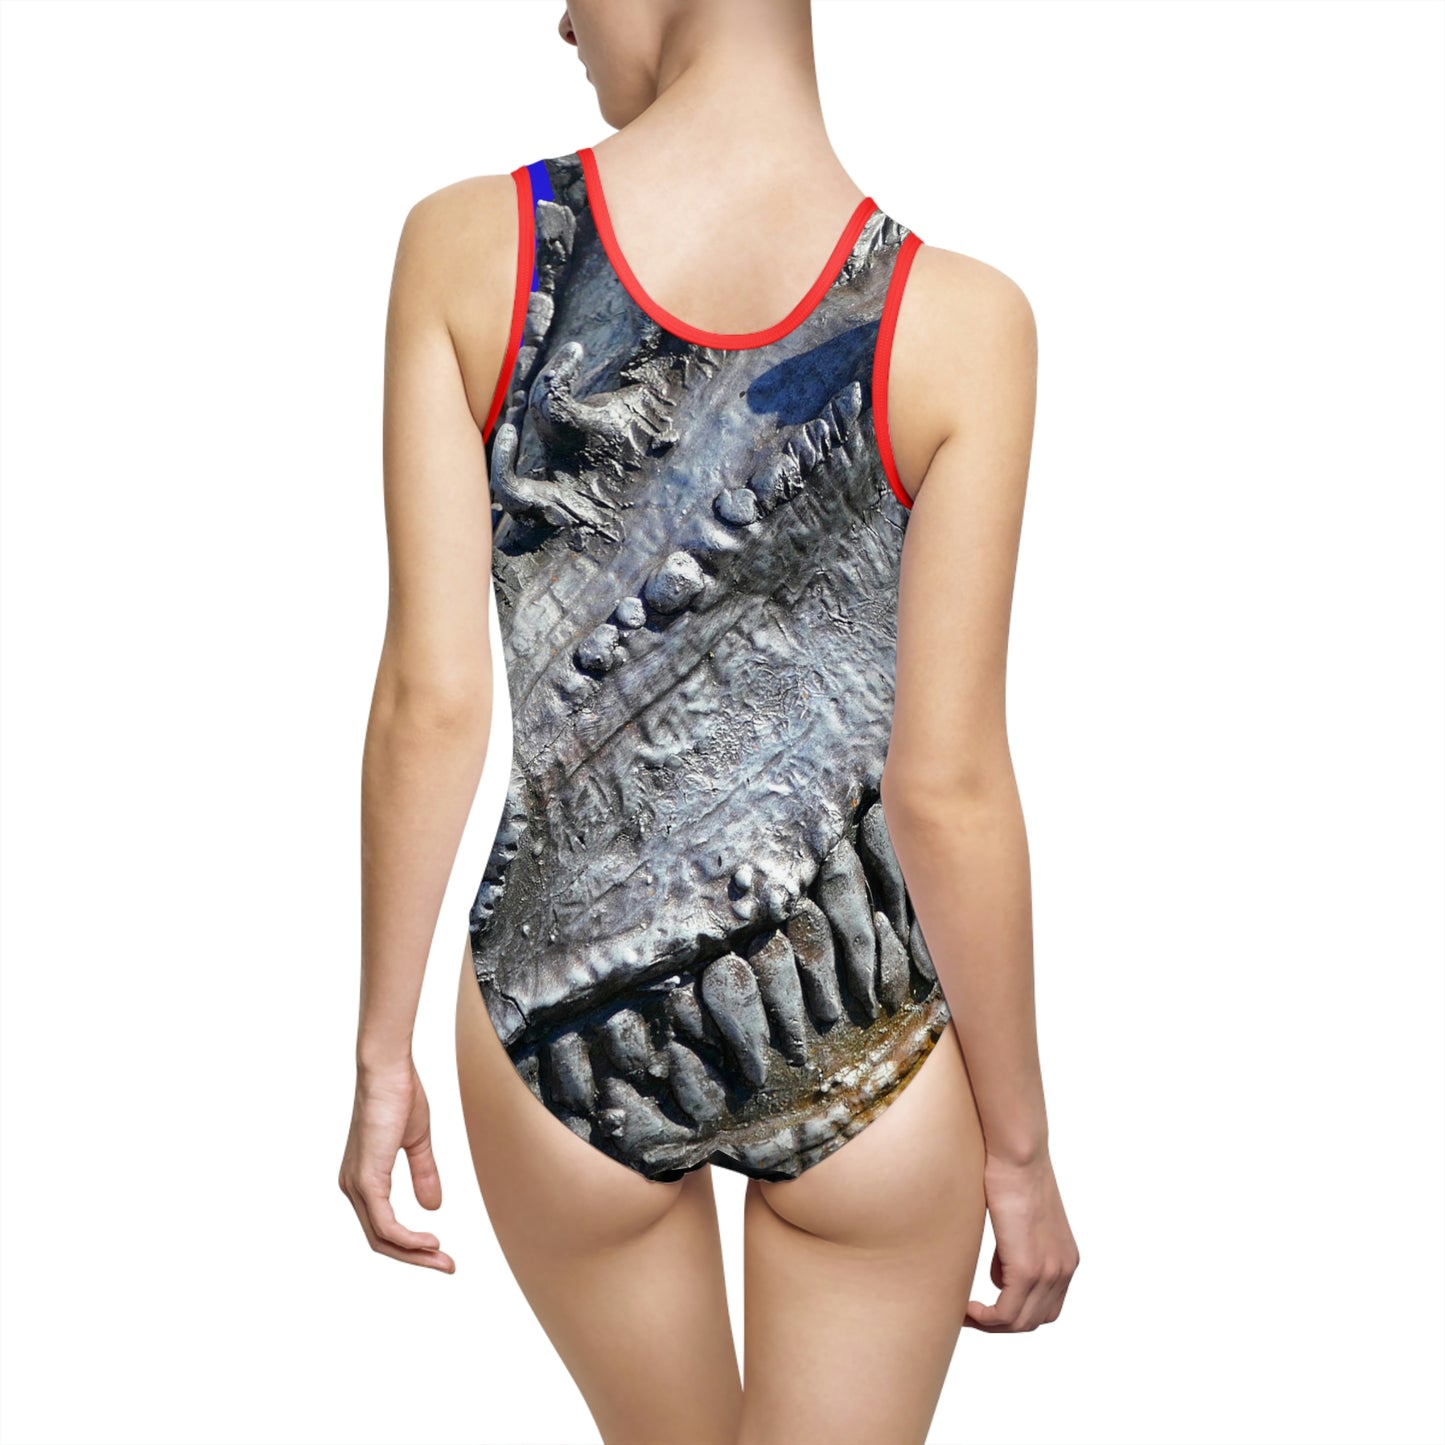 Delectable Vision - Women's Classic One-Piece Swimsuit - Fry1Productions